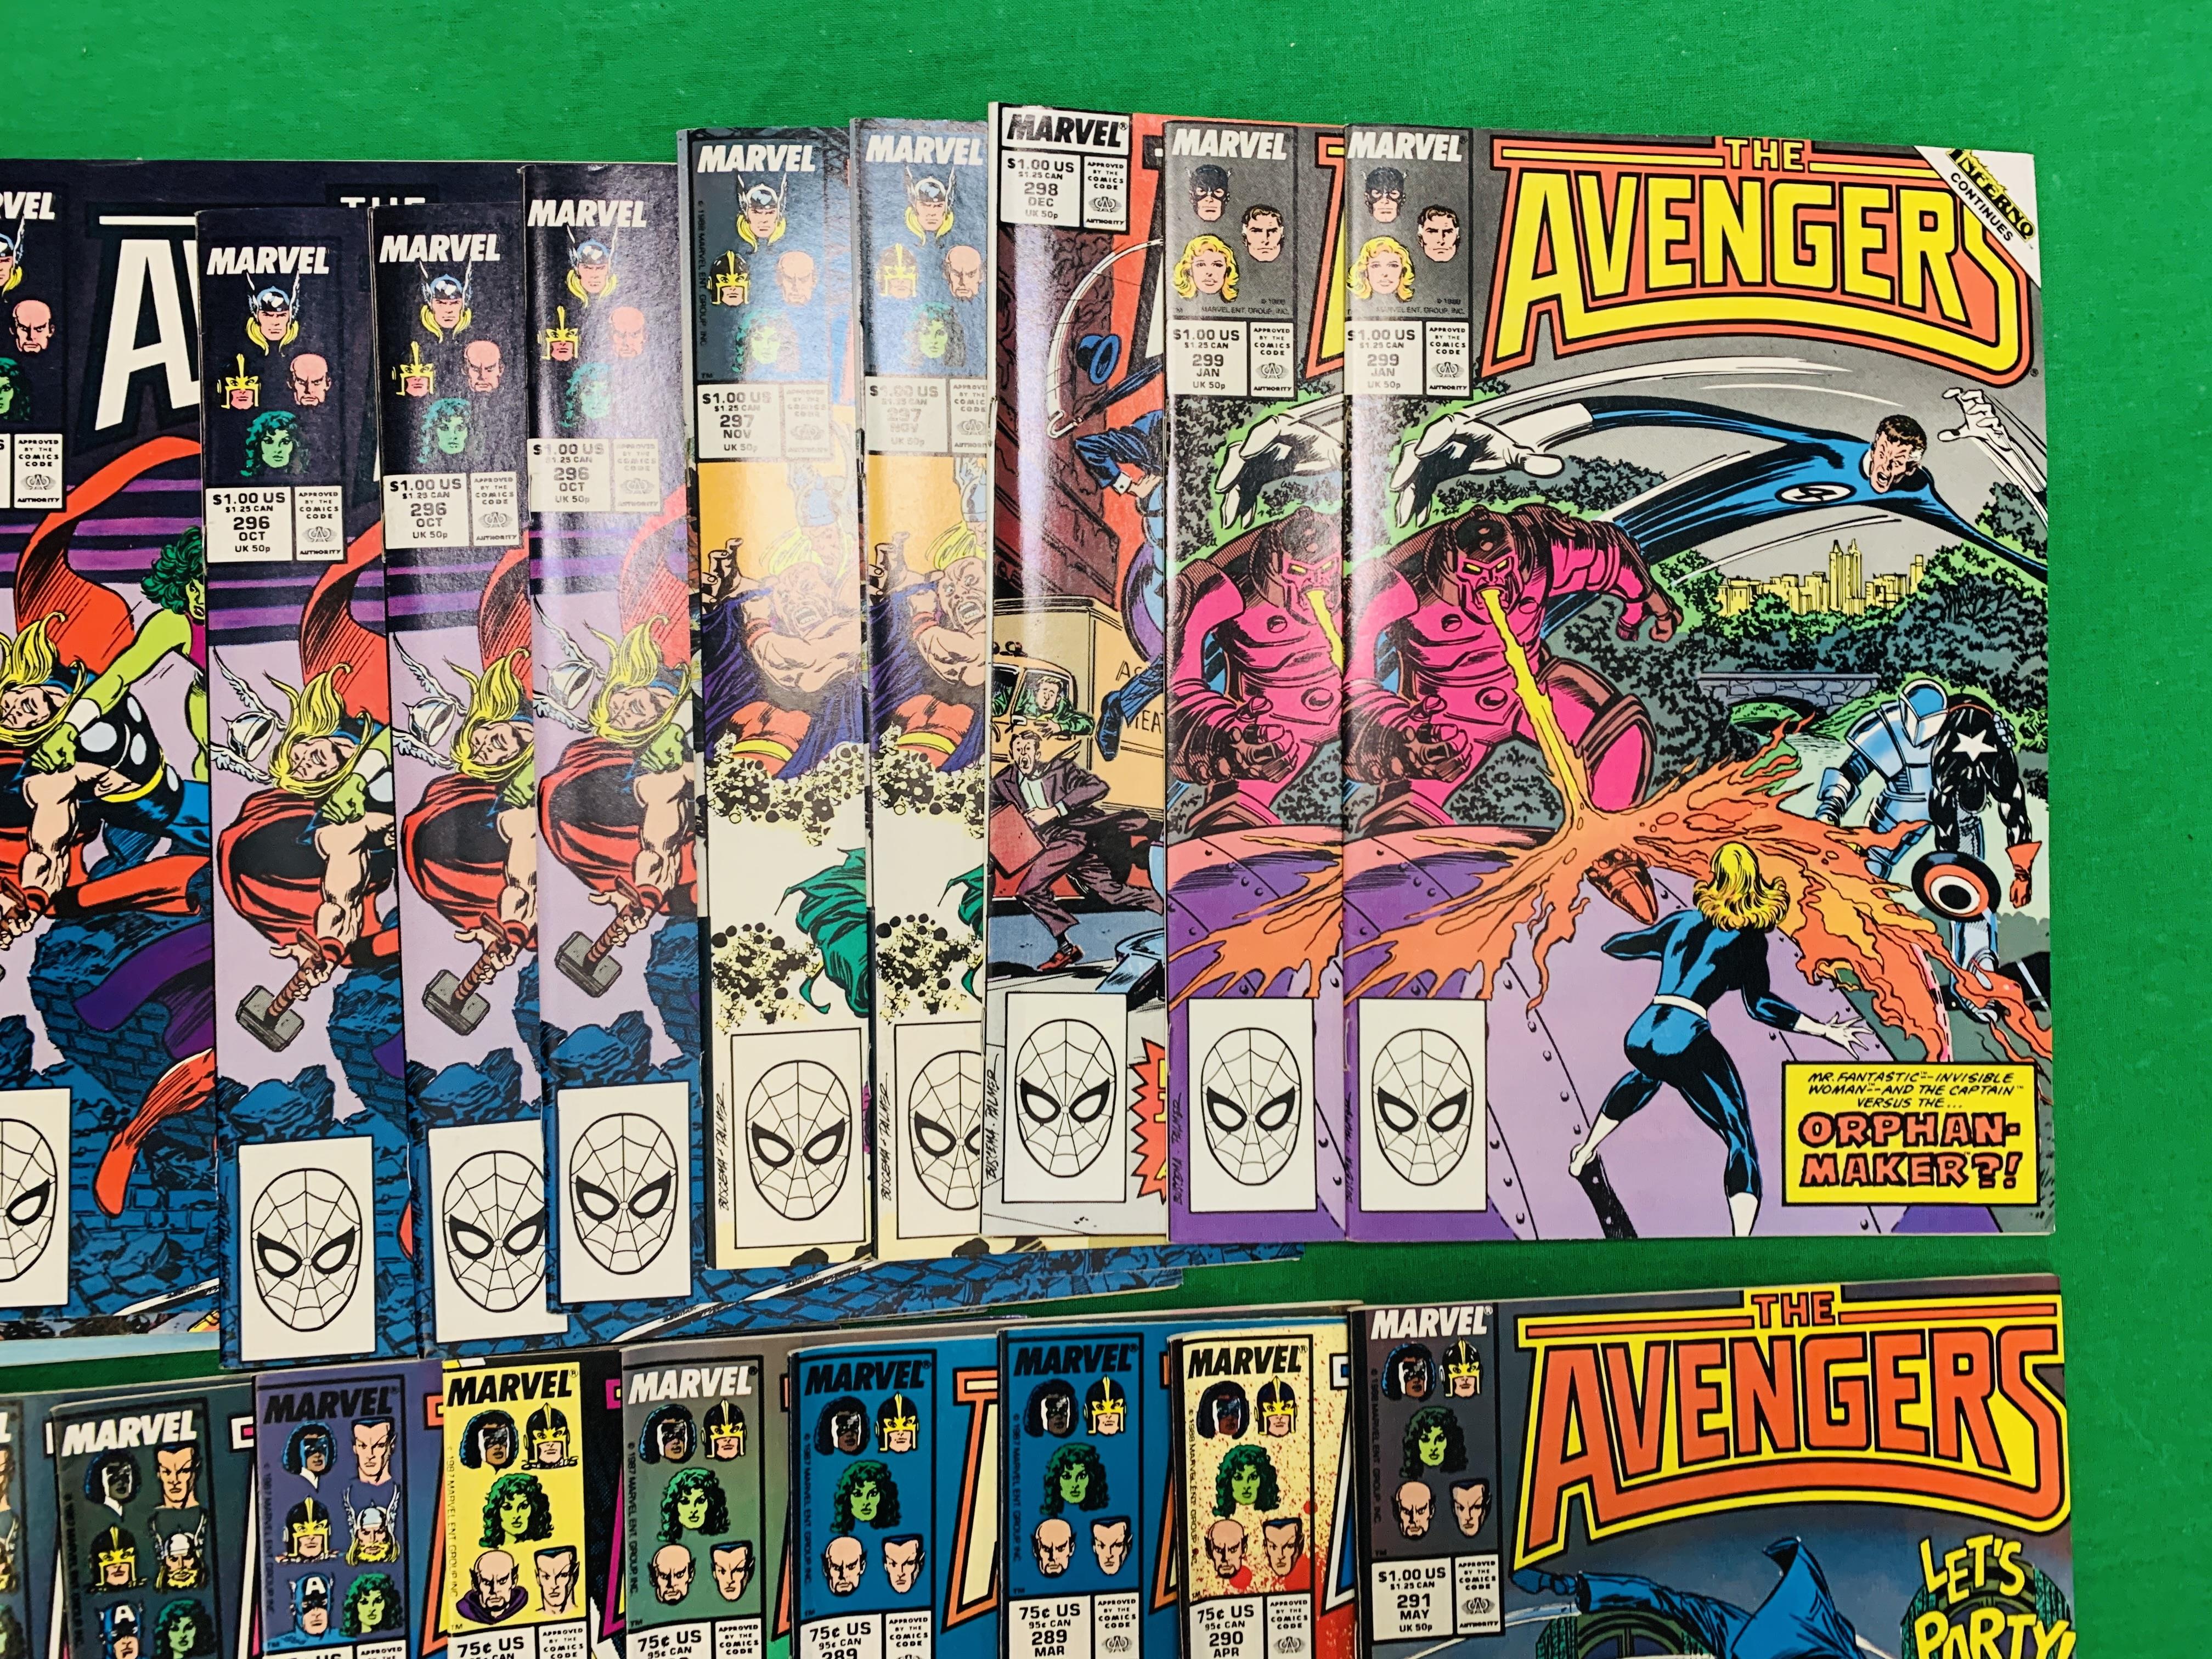 MARVEL COMICS THE AVENGERS NO. 101 - 299, MISSING ISSUES 103 AND 110. - Image 130 of 130